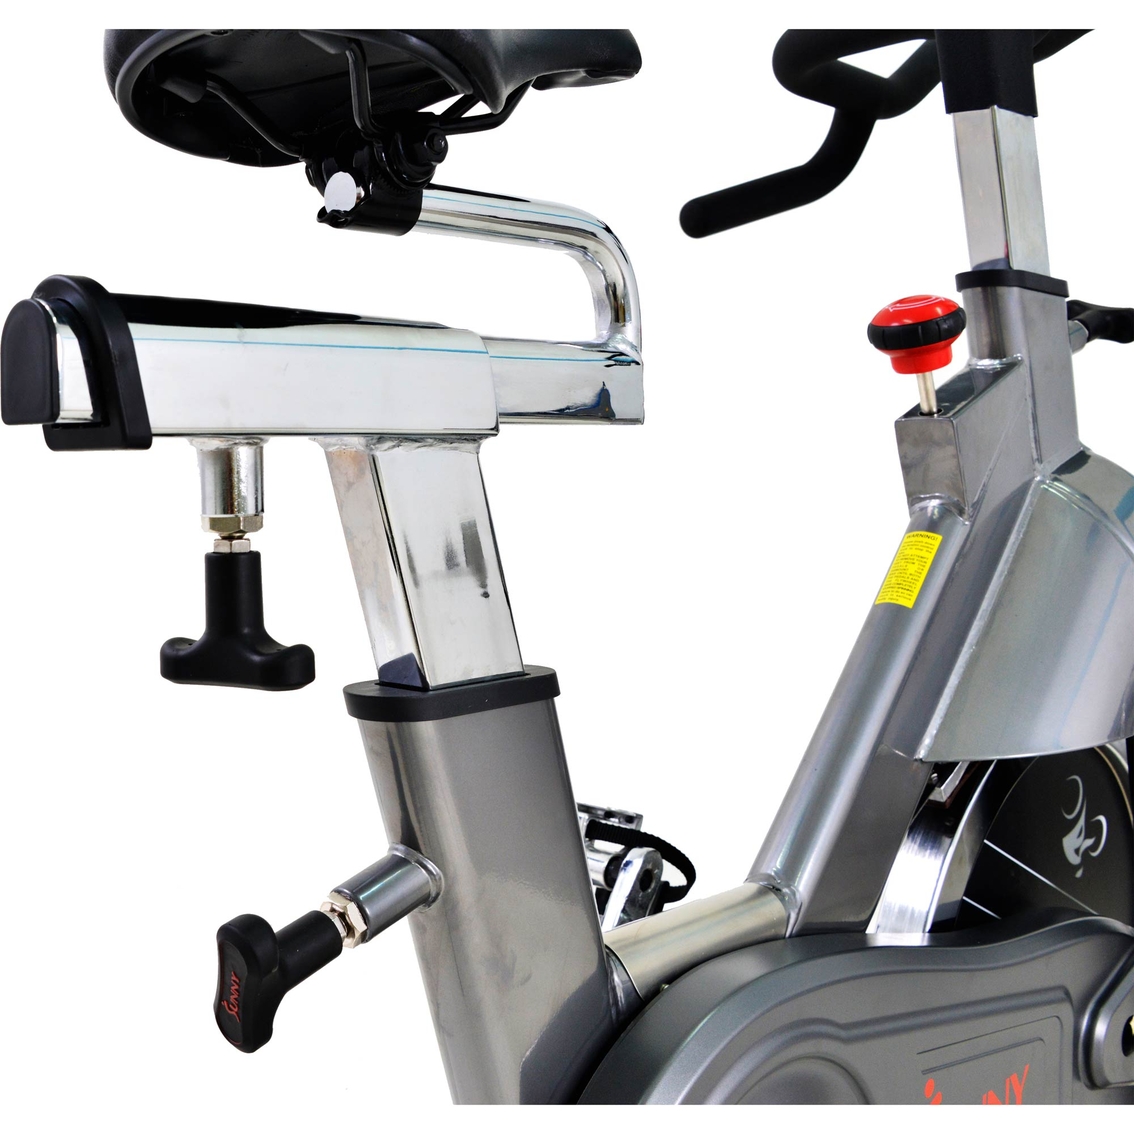 Sunny Health and Fitness SFB1516 Commercial Indoor Cycling Bike - Image 3 of 4